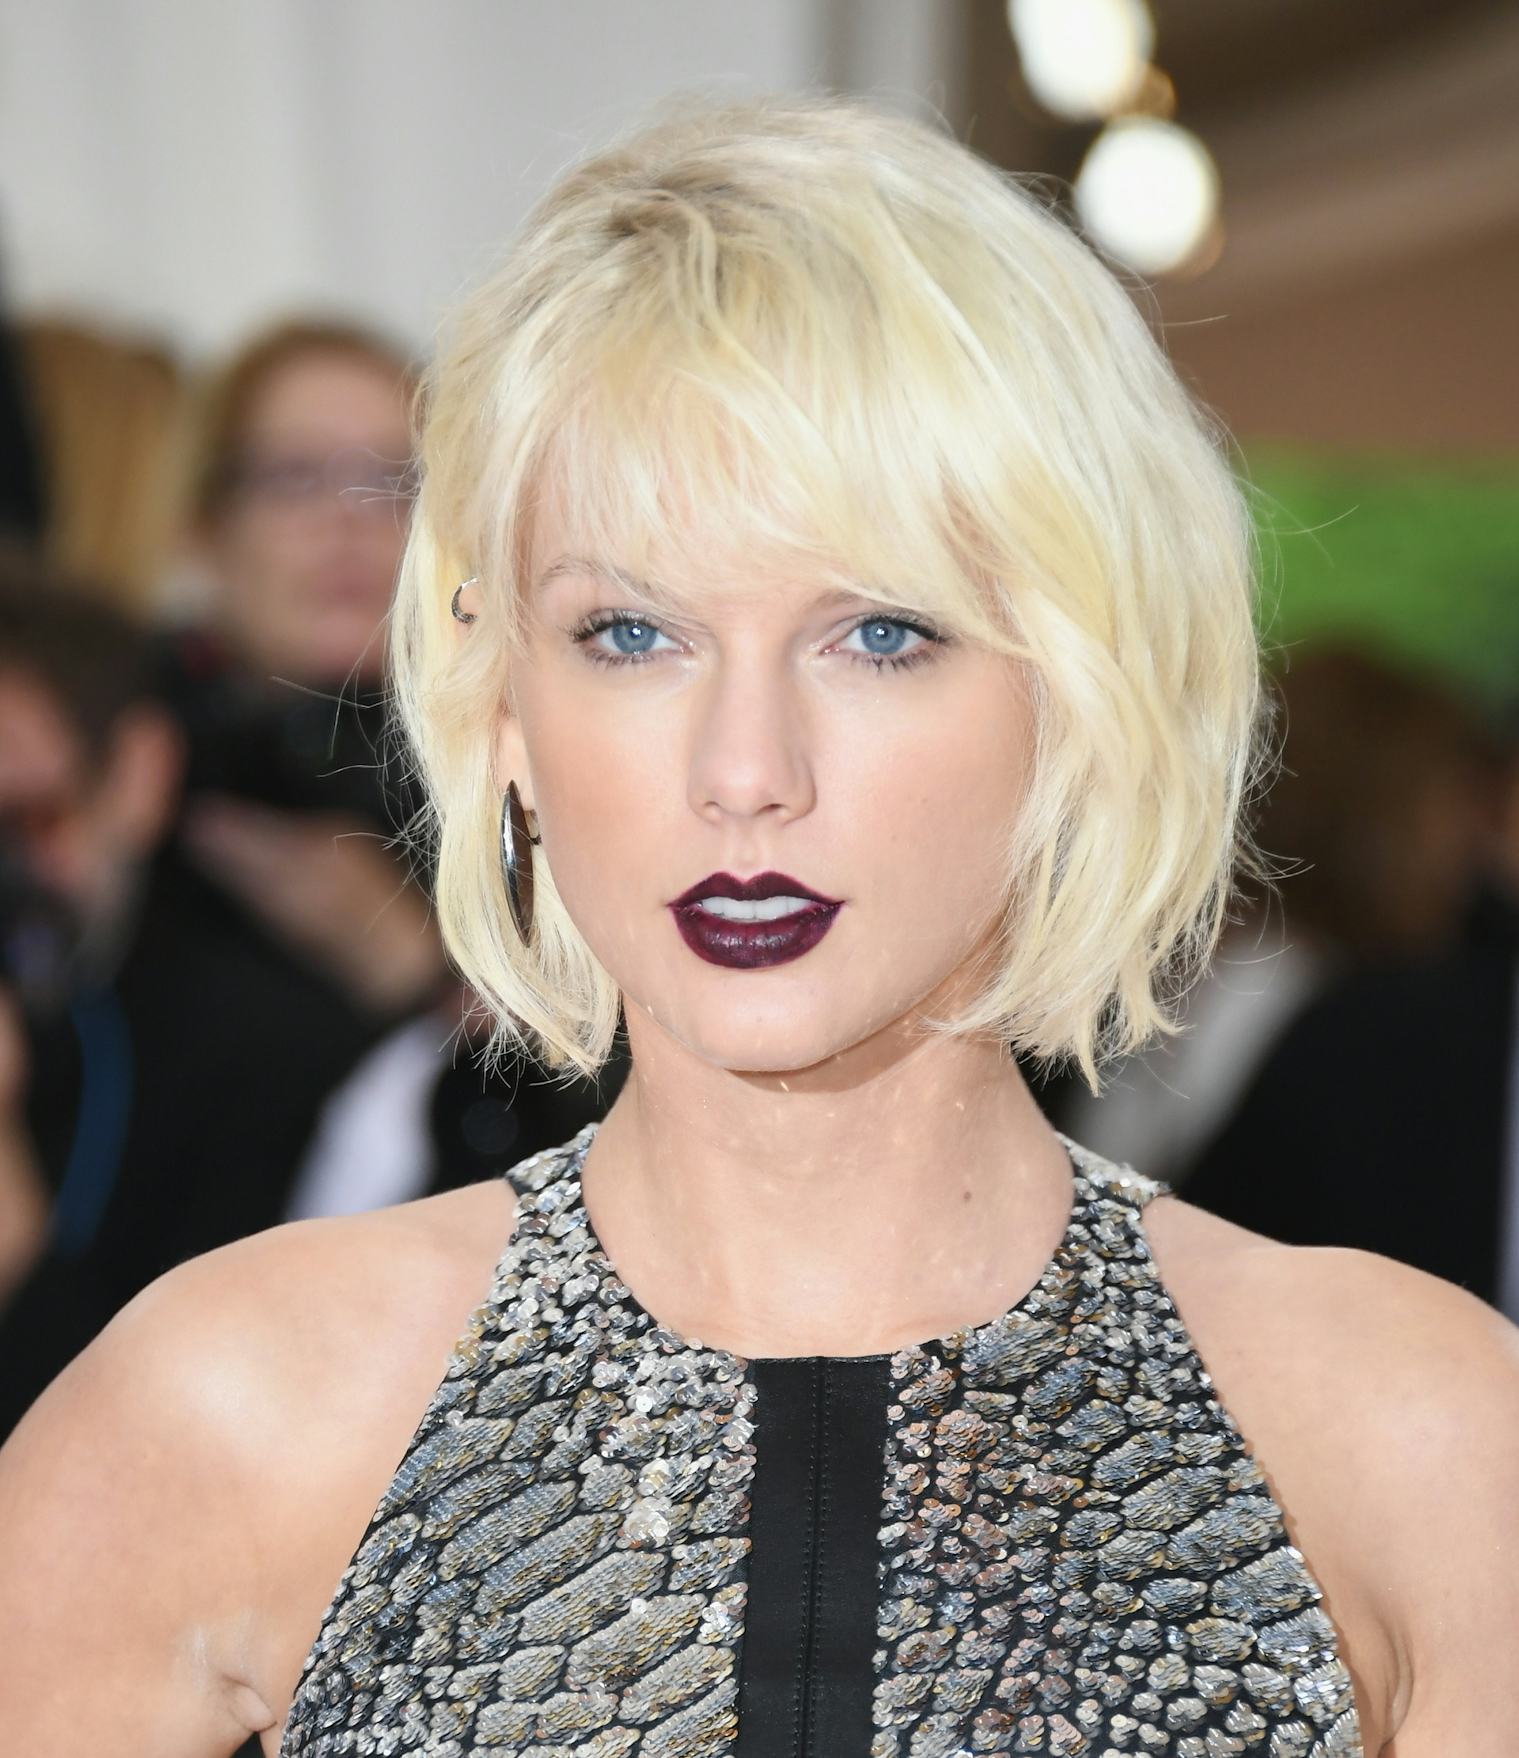 Photos Of Taylor Swift's Natural Blonde Hair Prove She's Ditched The